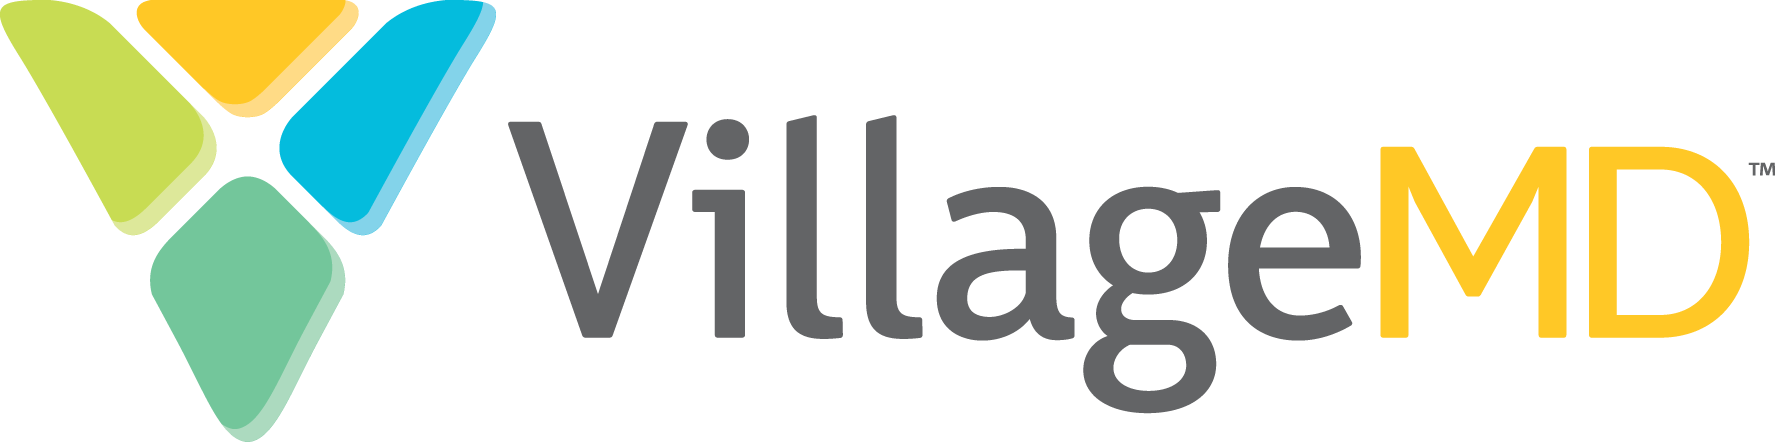 VillageMD to Expand into Rhode Island, Opening 12 New Village Medical Practices